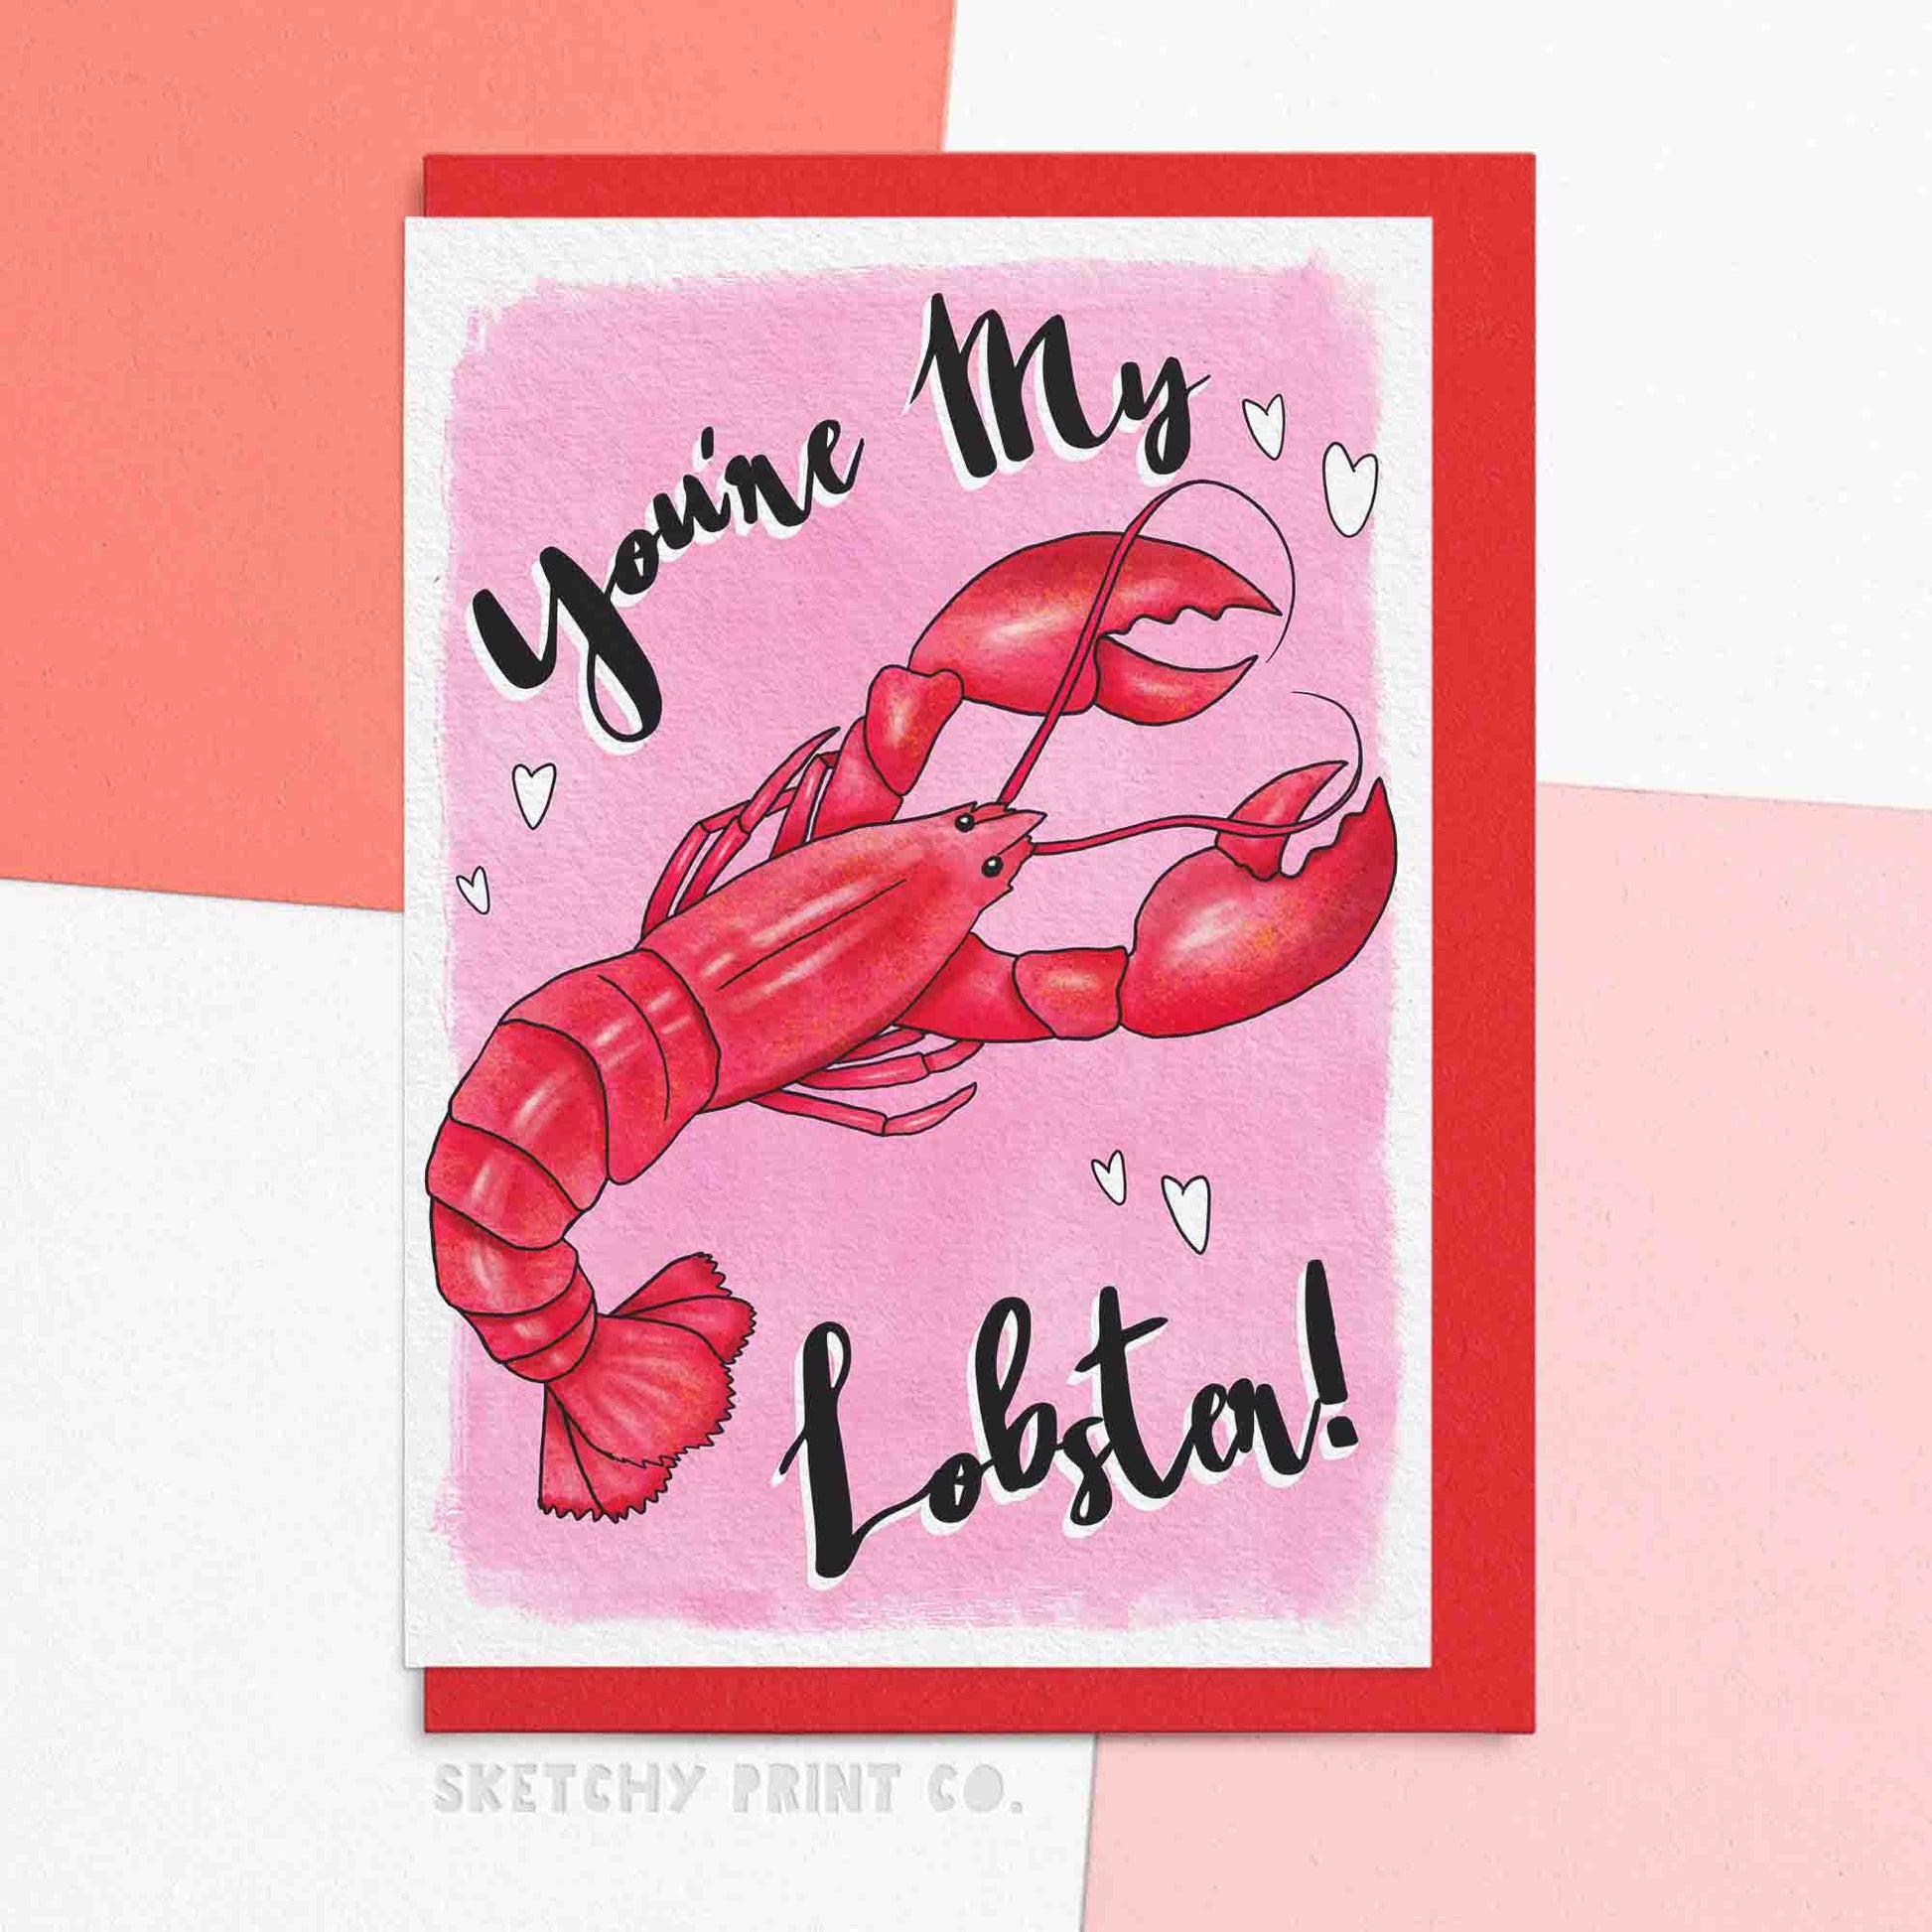 Funny Valentines card for boyfriend or girlfriend reading you're my lobster! A red lobster with a pink background and white hearts. FSC certified paper card with matching red envelope.